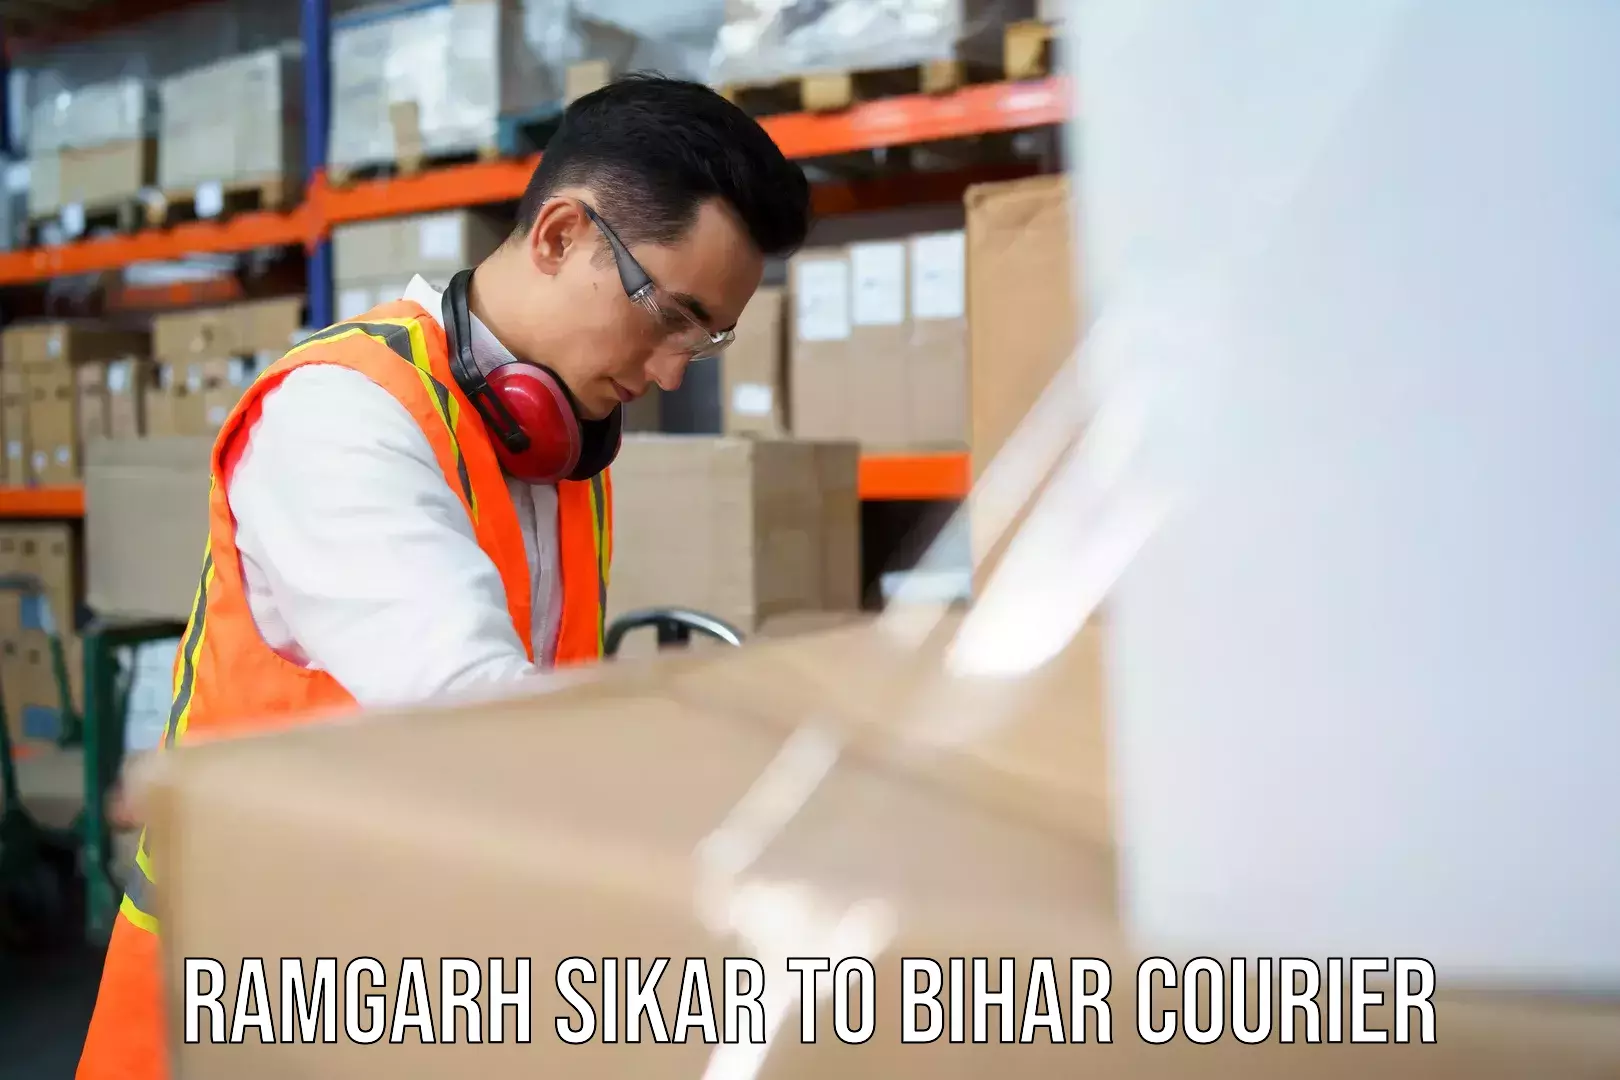 Fast-track shipping solutions Ramgarh Sikar to Birpur